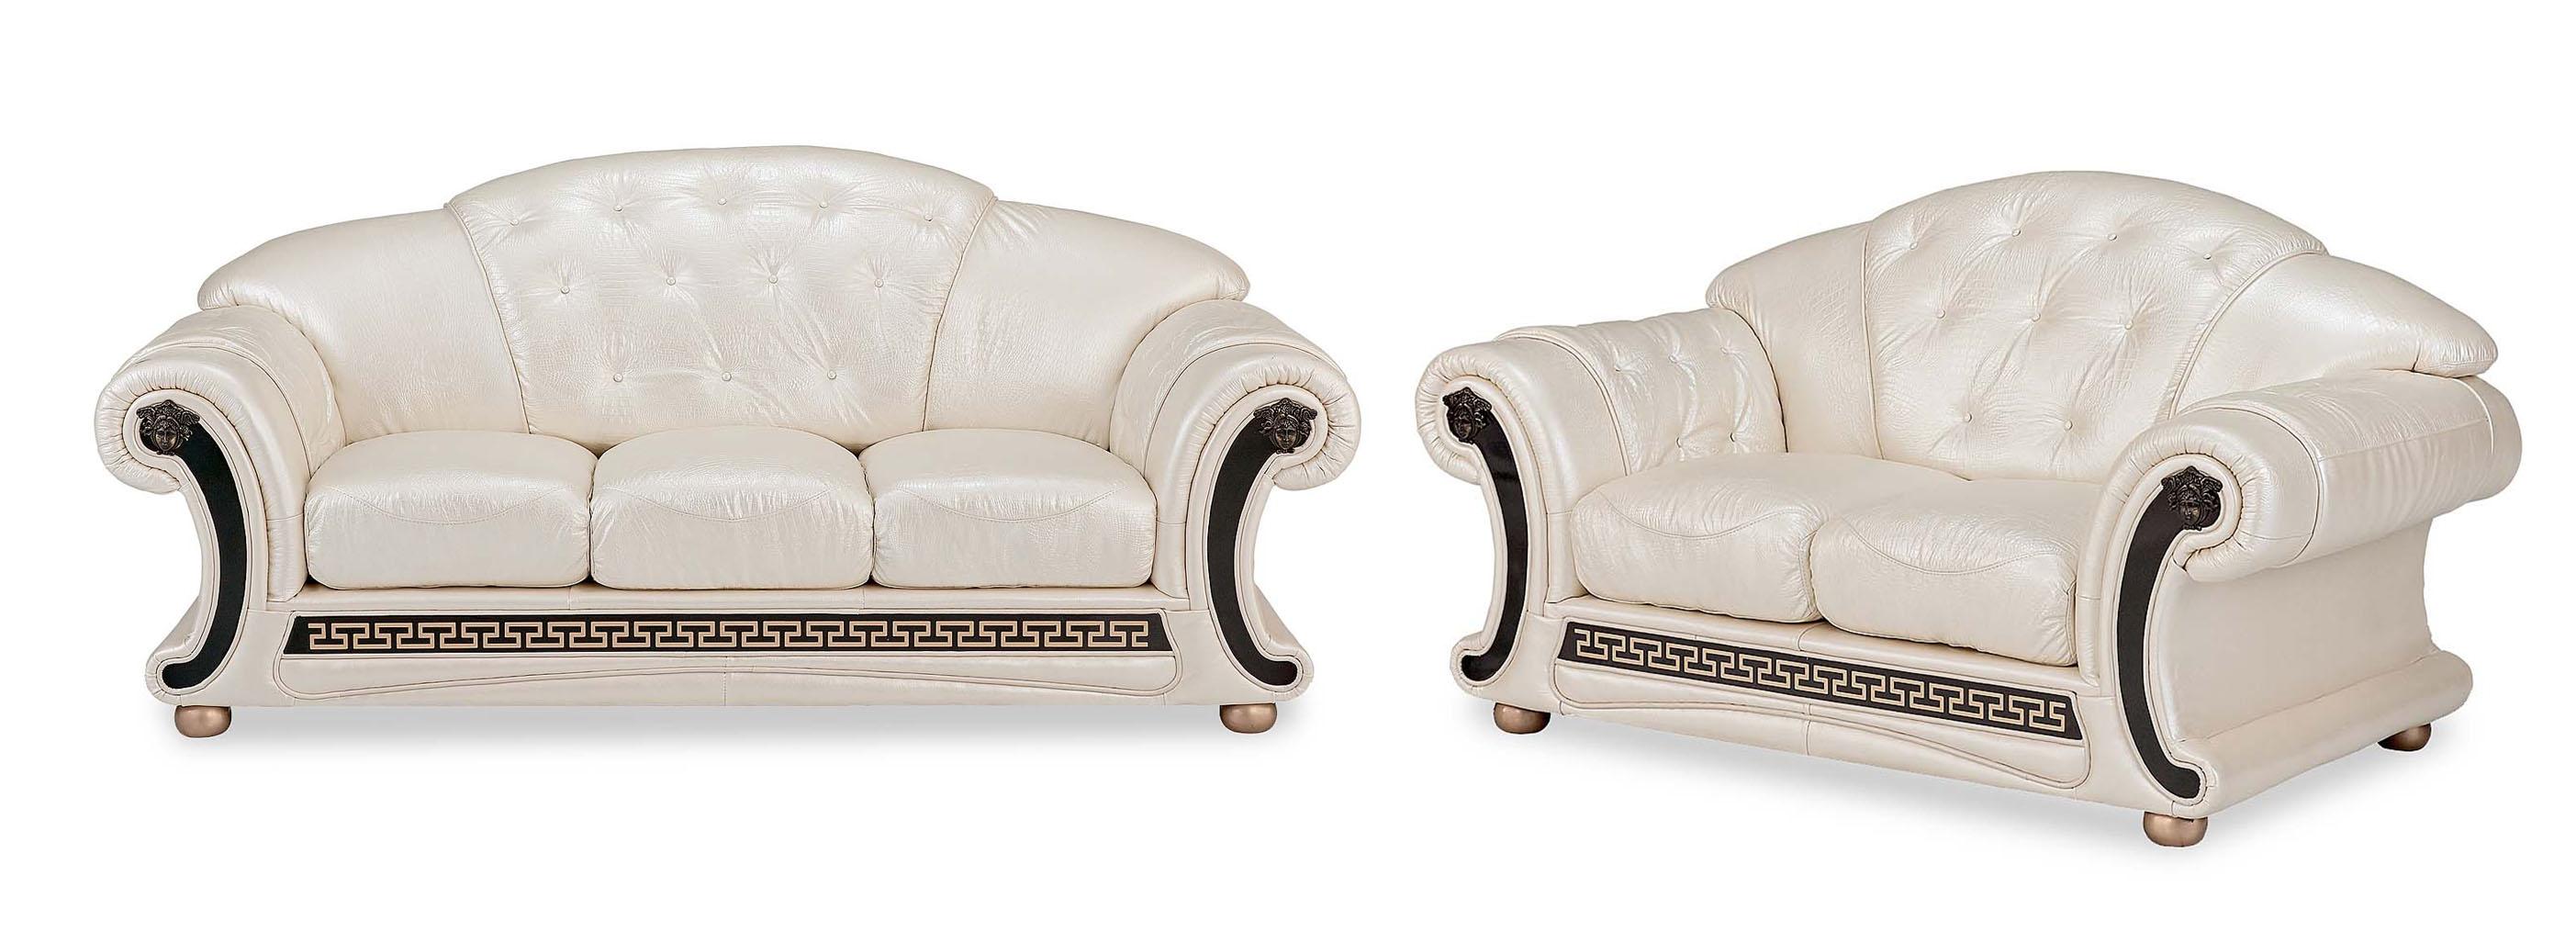 Traditional Sofa and Loveseat Set Apolo ESF-Apolo Pearl-2PC in White Top grain leather